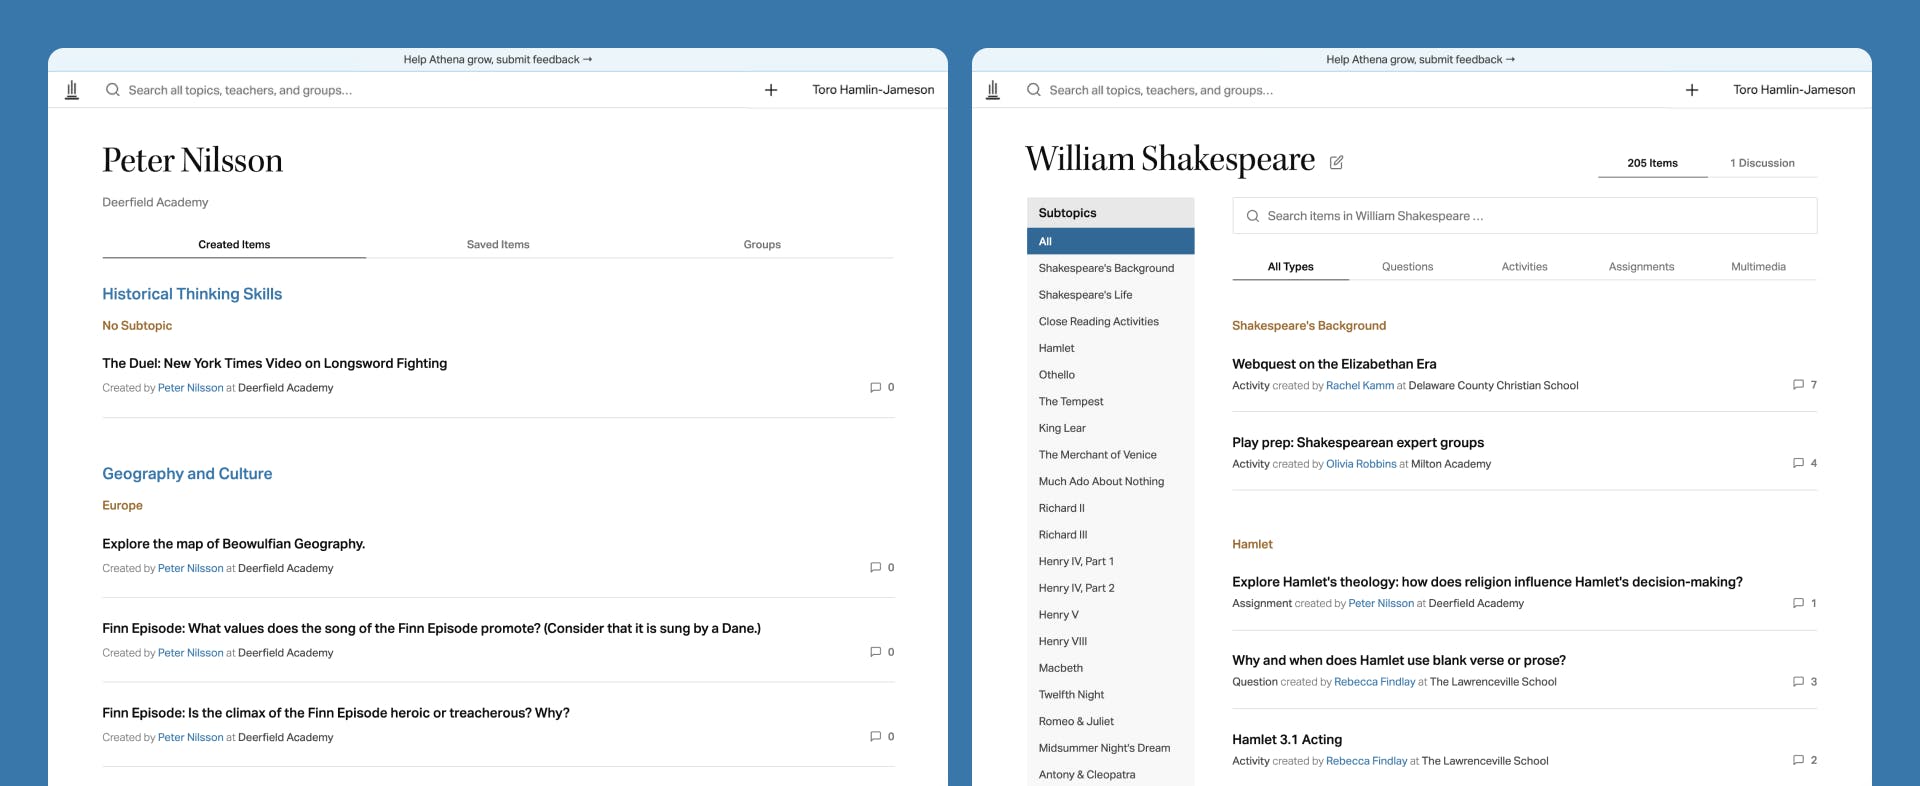 Two screenshots of the Athena application; the first is a user profile screen, the second a topic screen about William Shakespeare.